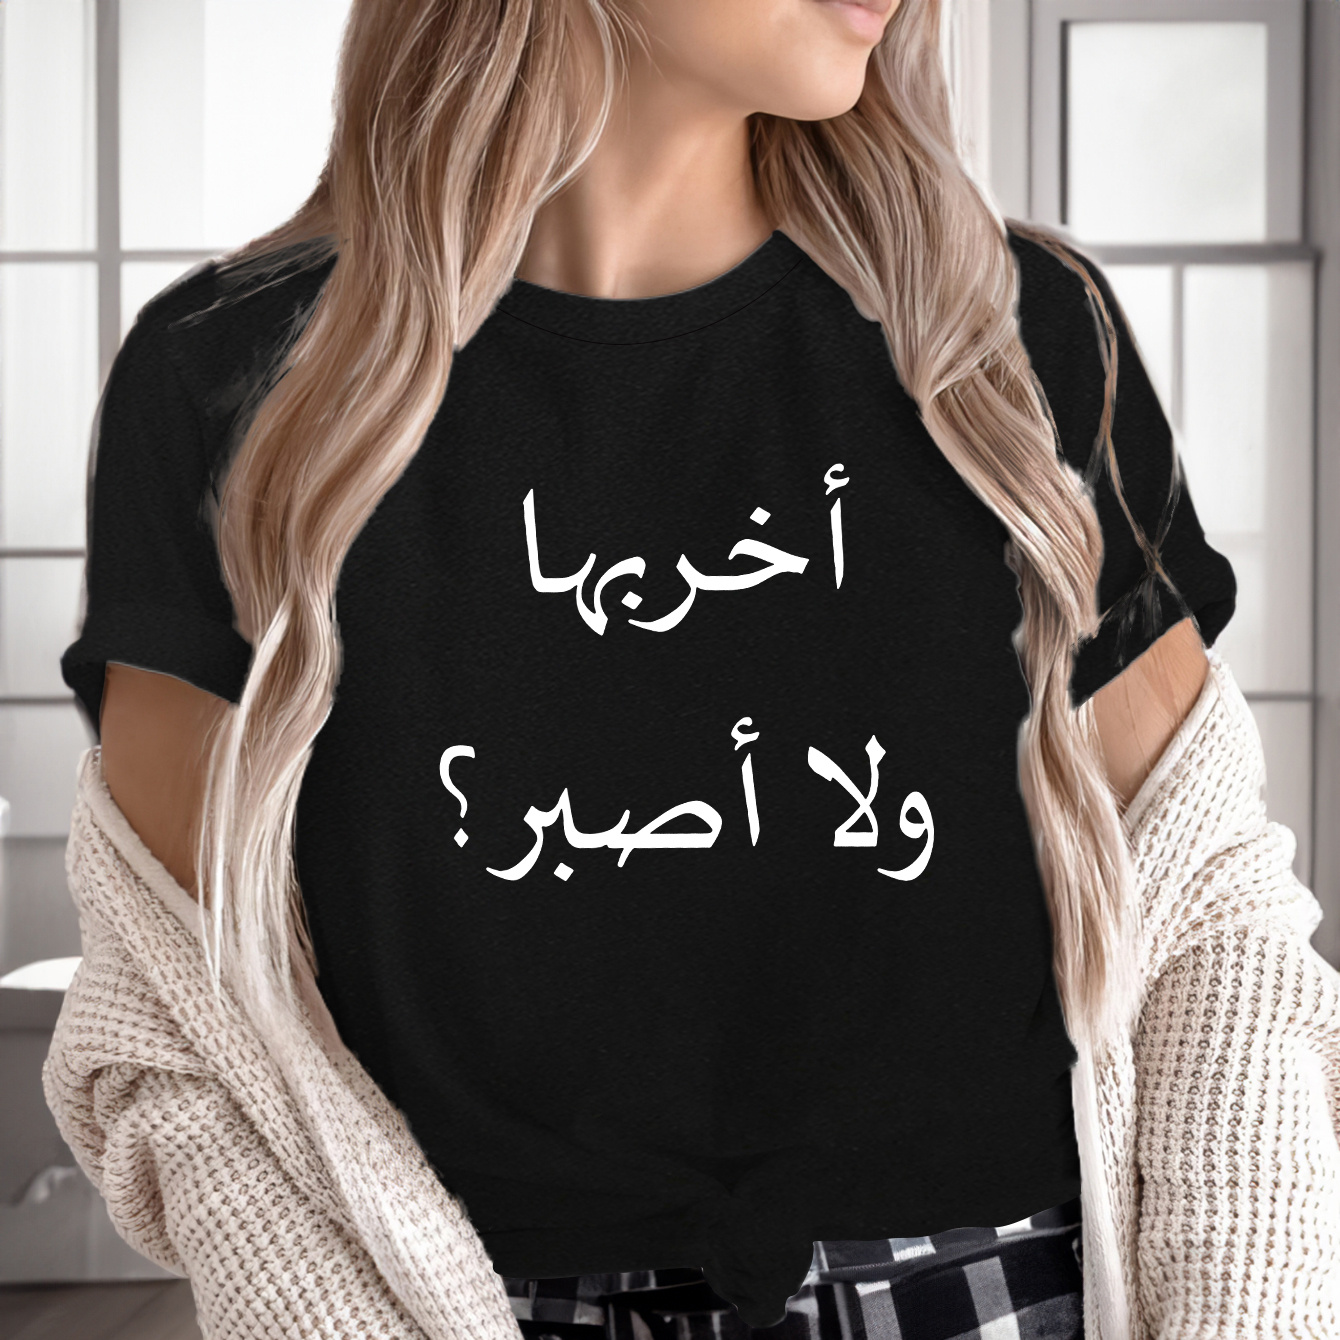 

Arabic Letter Print Lounge Top, Casual Short Sleeve Round Neck Stretchy T-shirt, Women's Loungewear